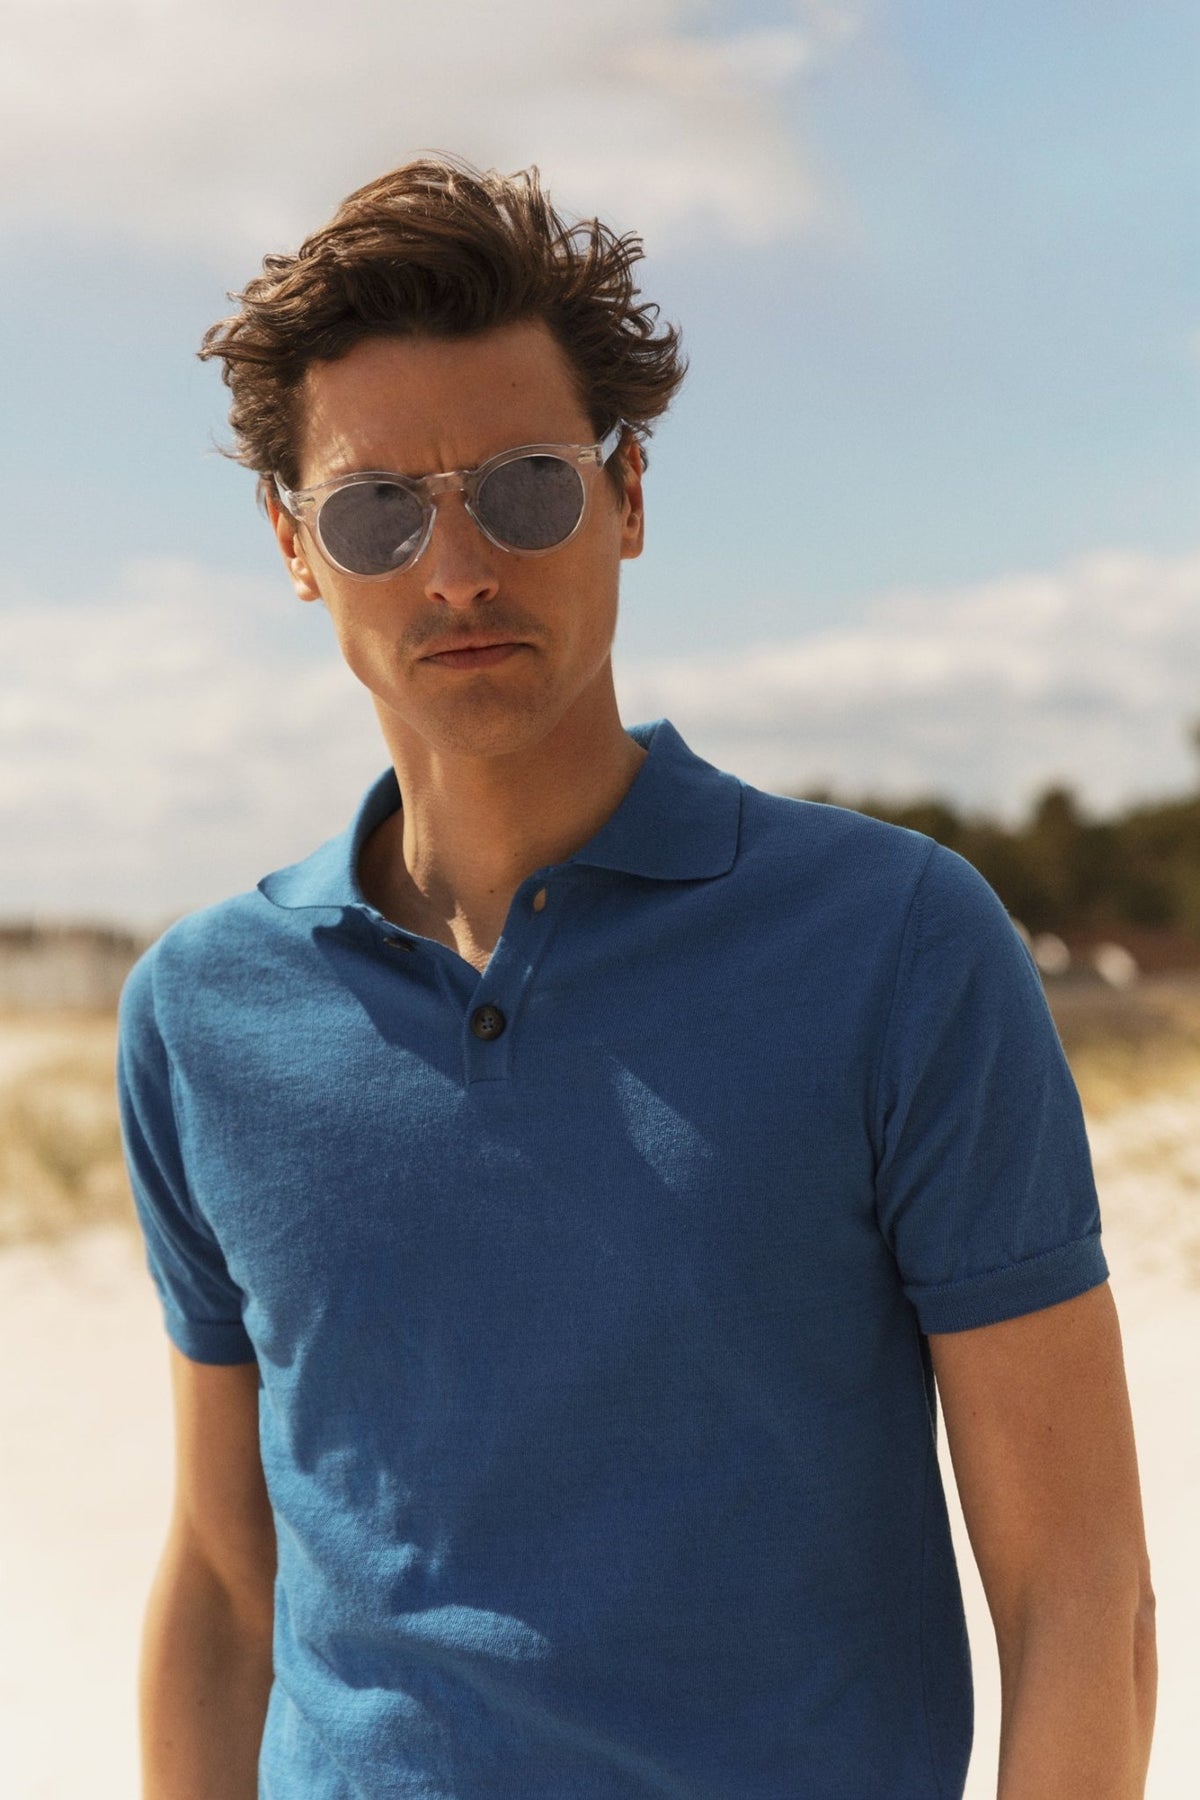 Resort Co Review: Man Wearing The Resort Co Blue Polo and Sunglasses